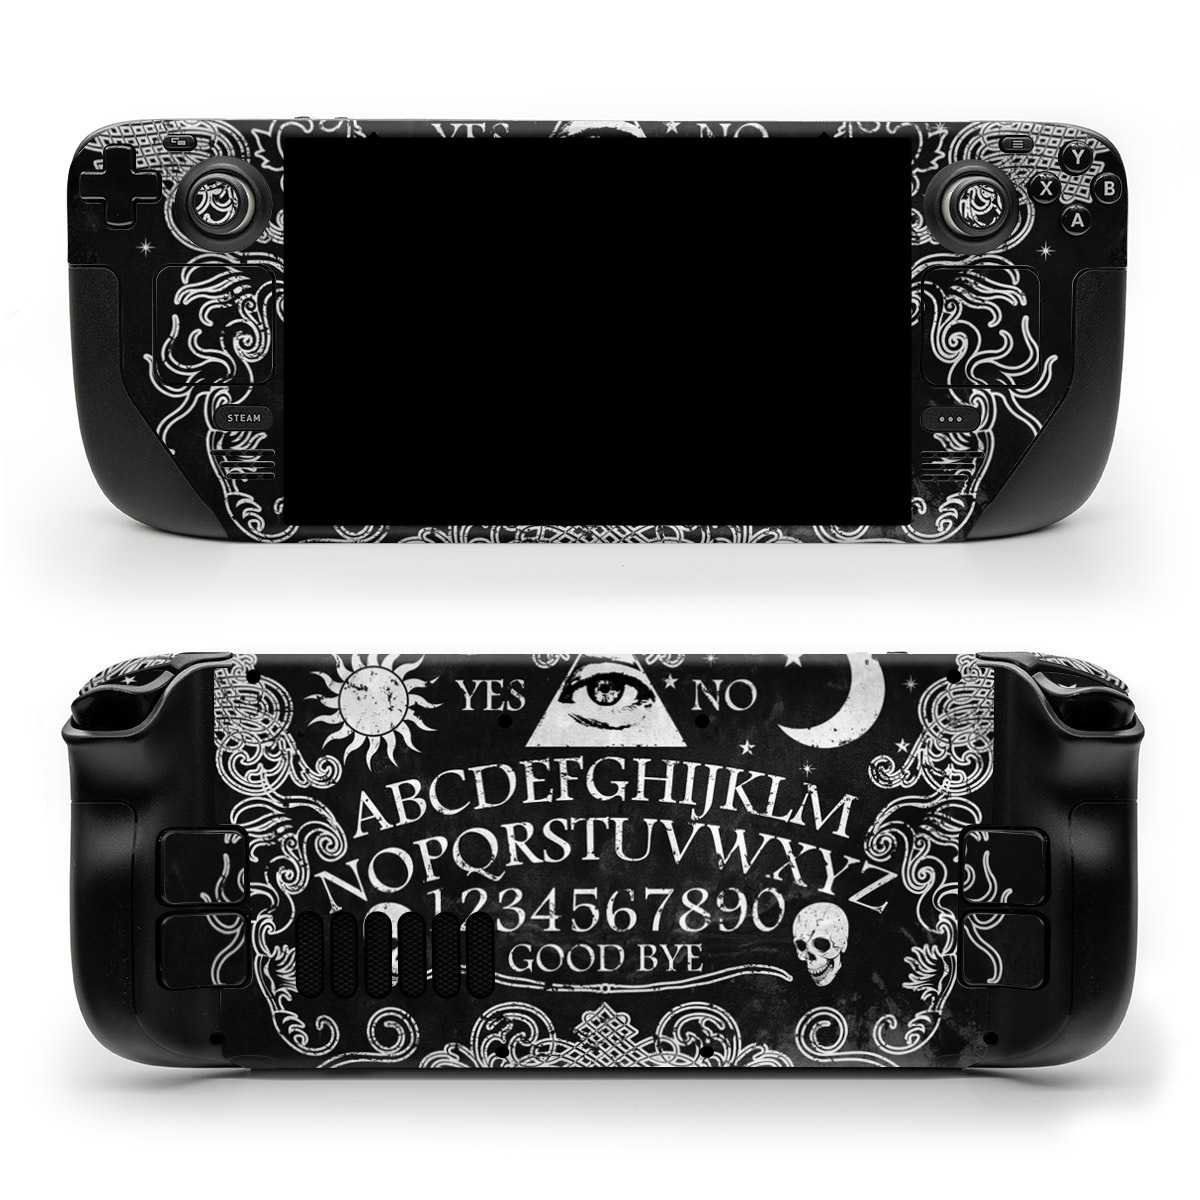 Valve Steam Deck Skin design of Text, Font, Pattern, Design, Illustration, Headpiece, Tiara, Black-and-white, Calligraphy, Hair accessory, with black, white, gray colors